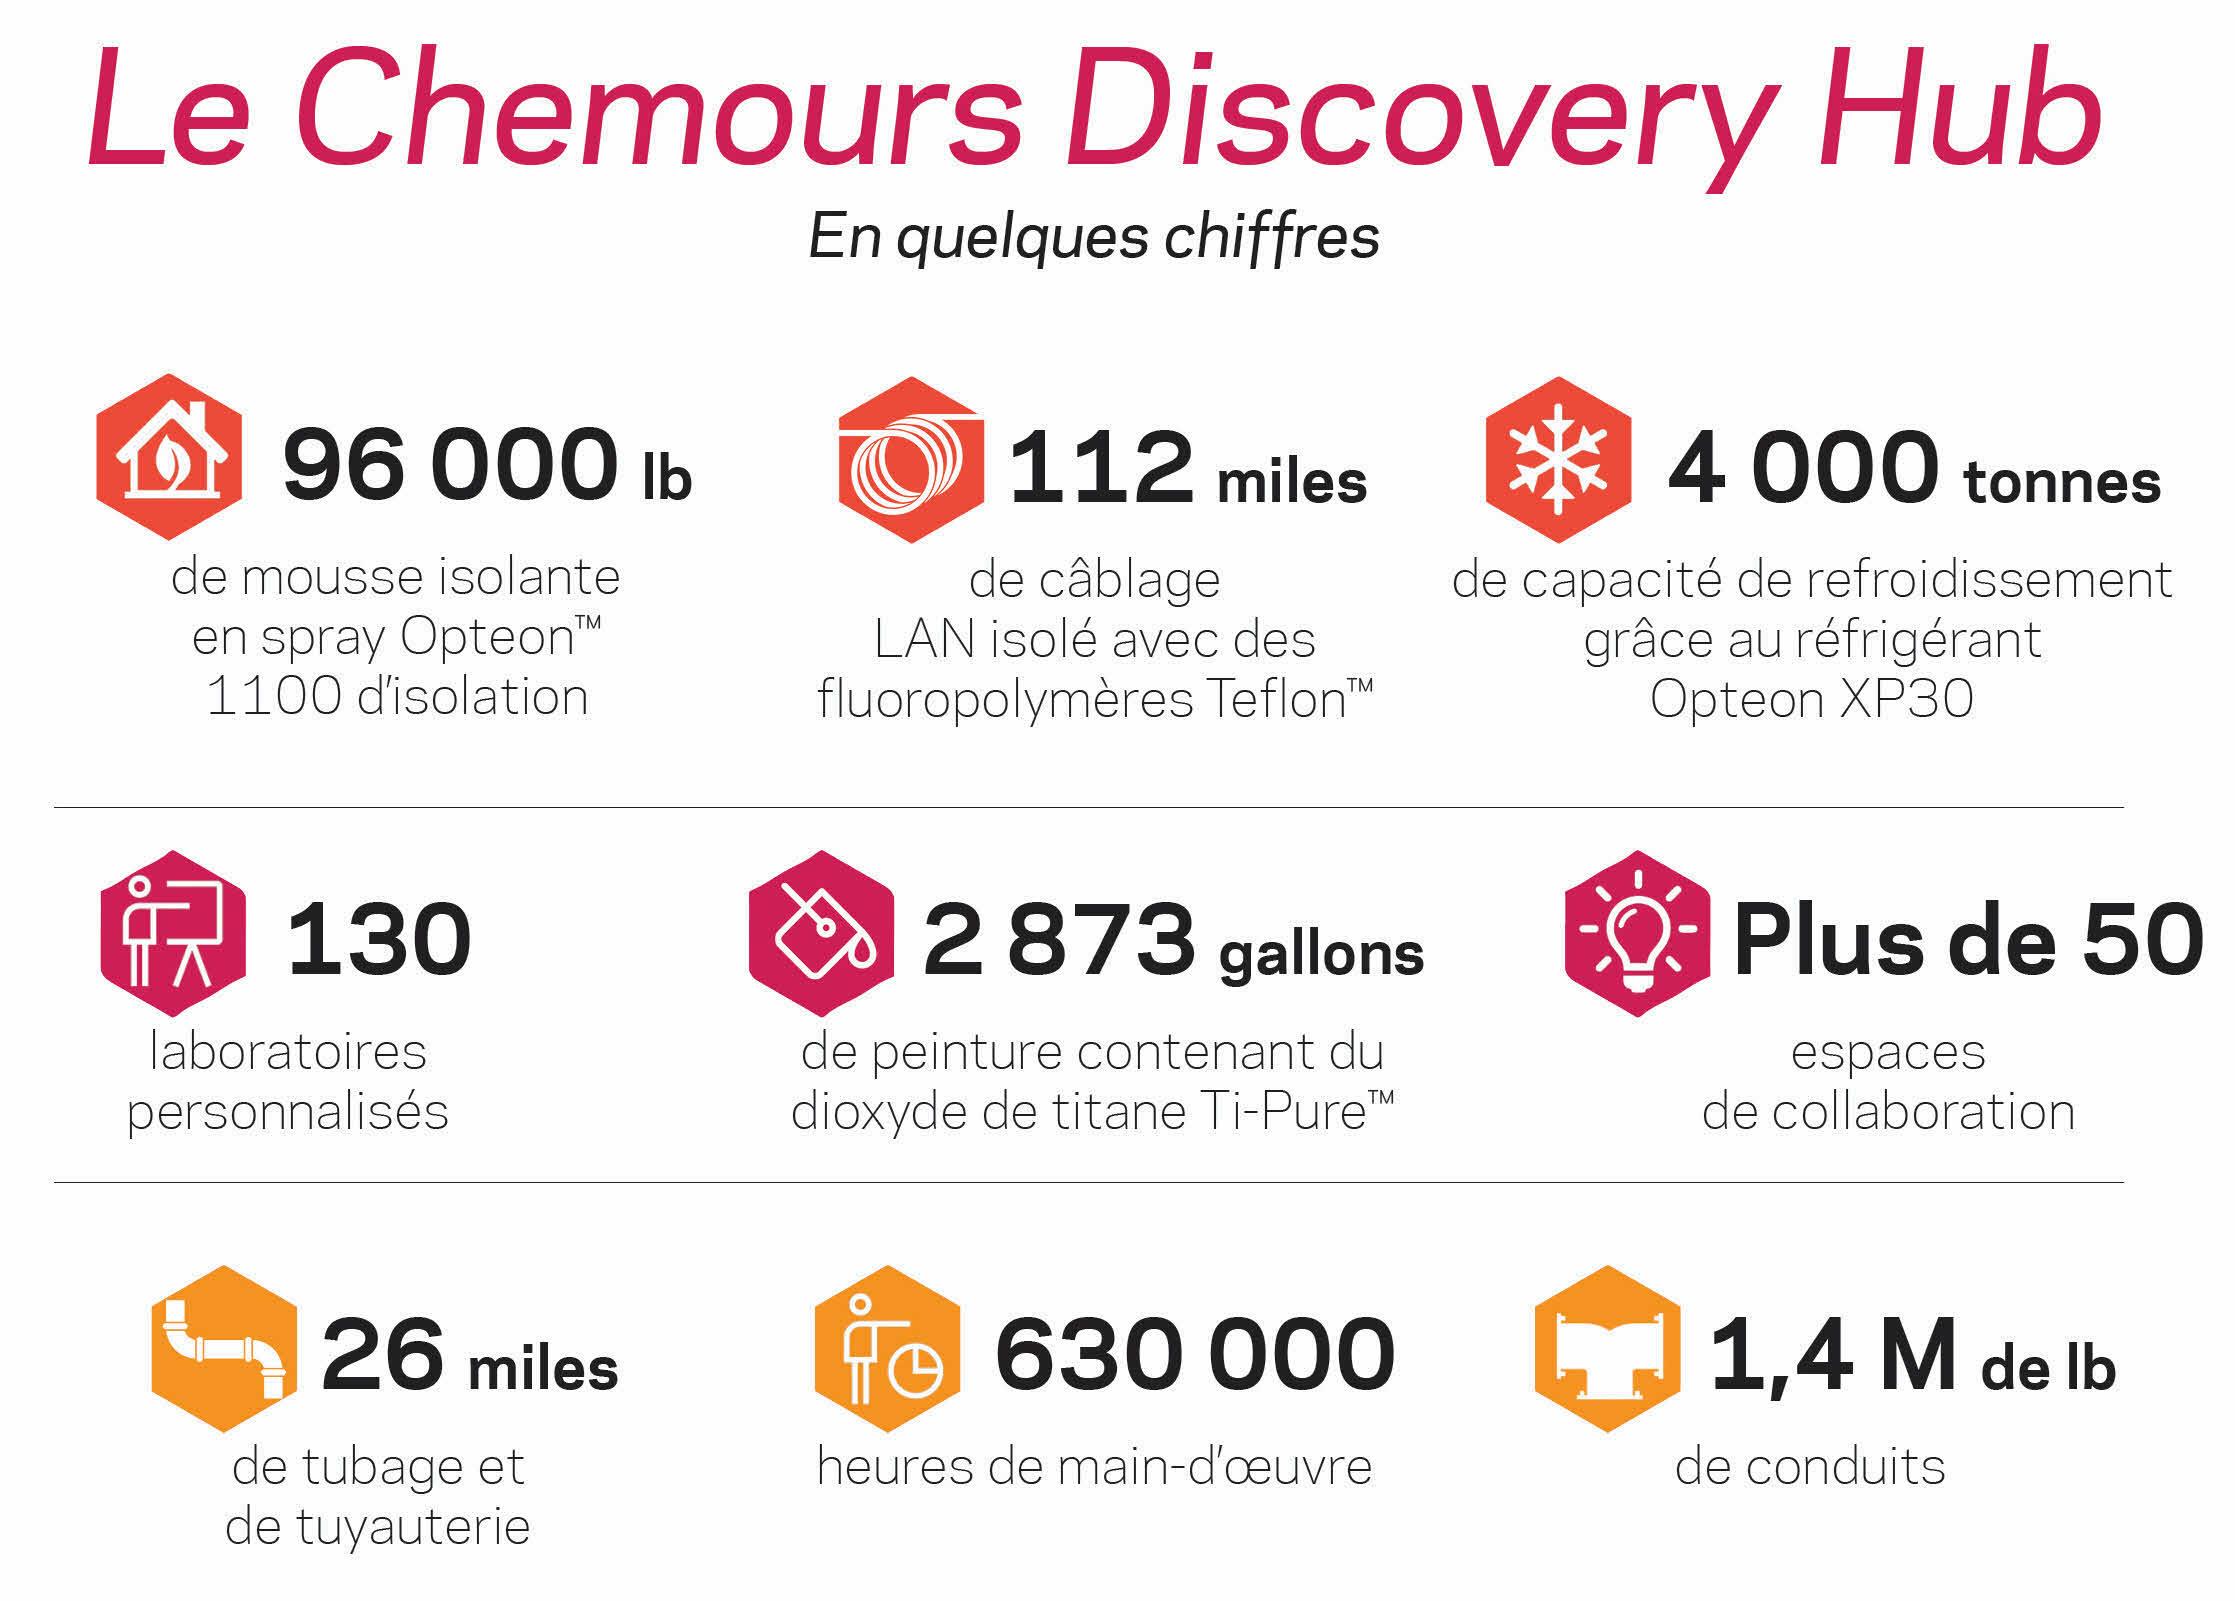 Statistiques concernant le Chemours Discovery Hub